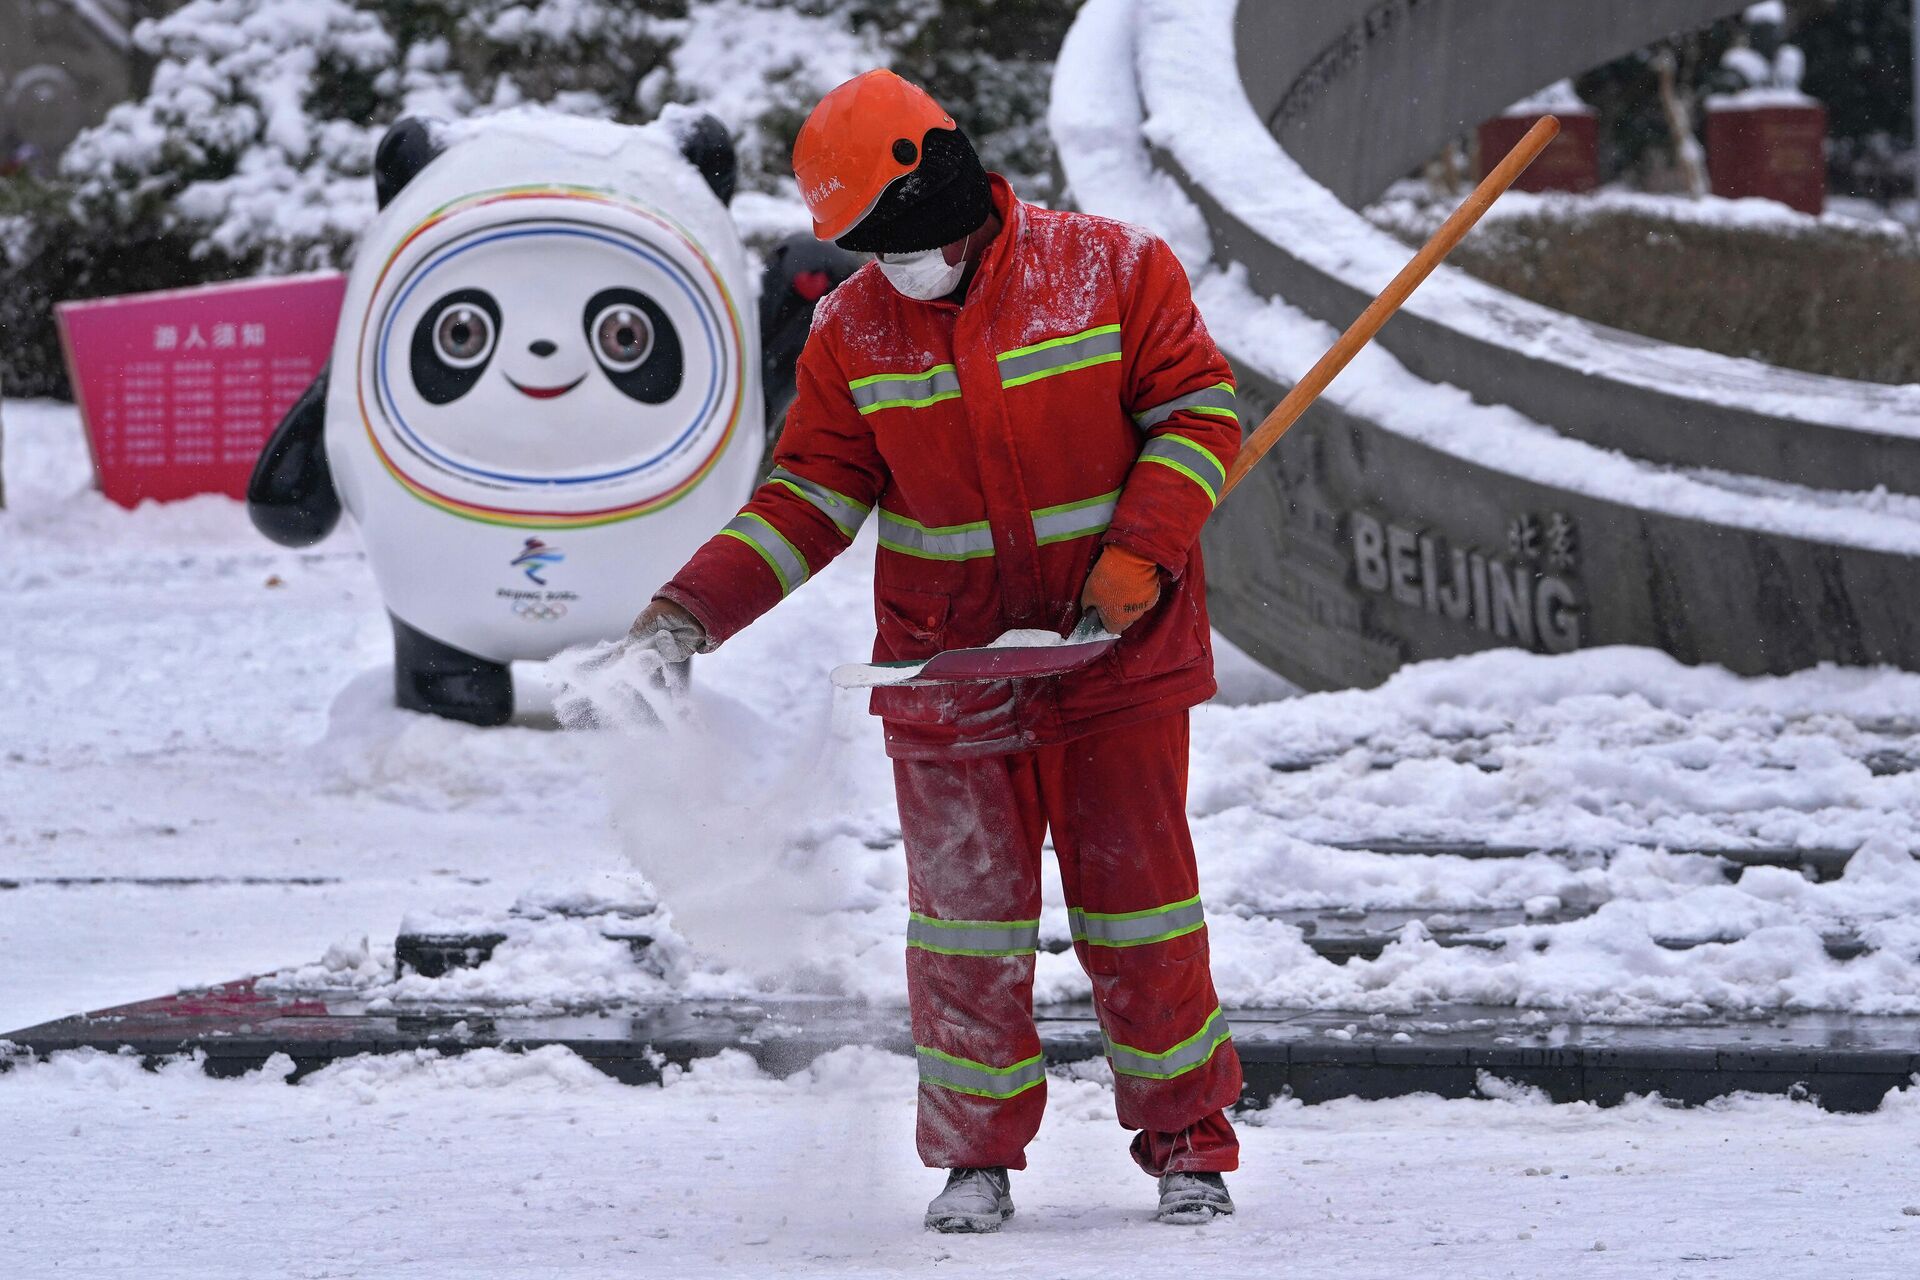 A worker sprays salt on the snow to prevent slipping near the Bing Dwen Dwen, the Beijing Winter Olympics mascot, on display at an Olympics monument during a snow fall in Beijing, Sunday, Feb. 13, 2022. - Sputnik International, 1920, 13.02.2022